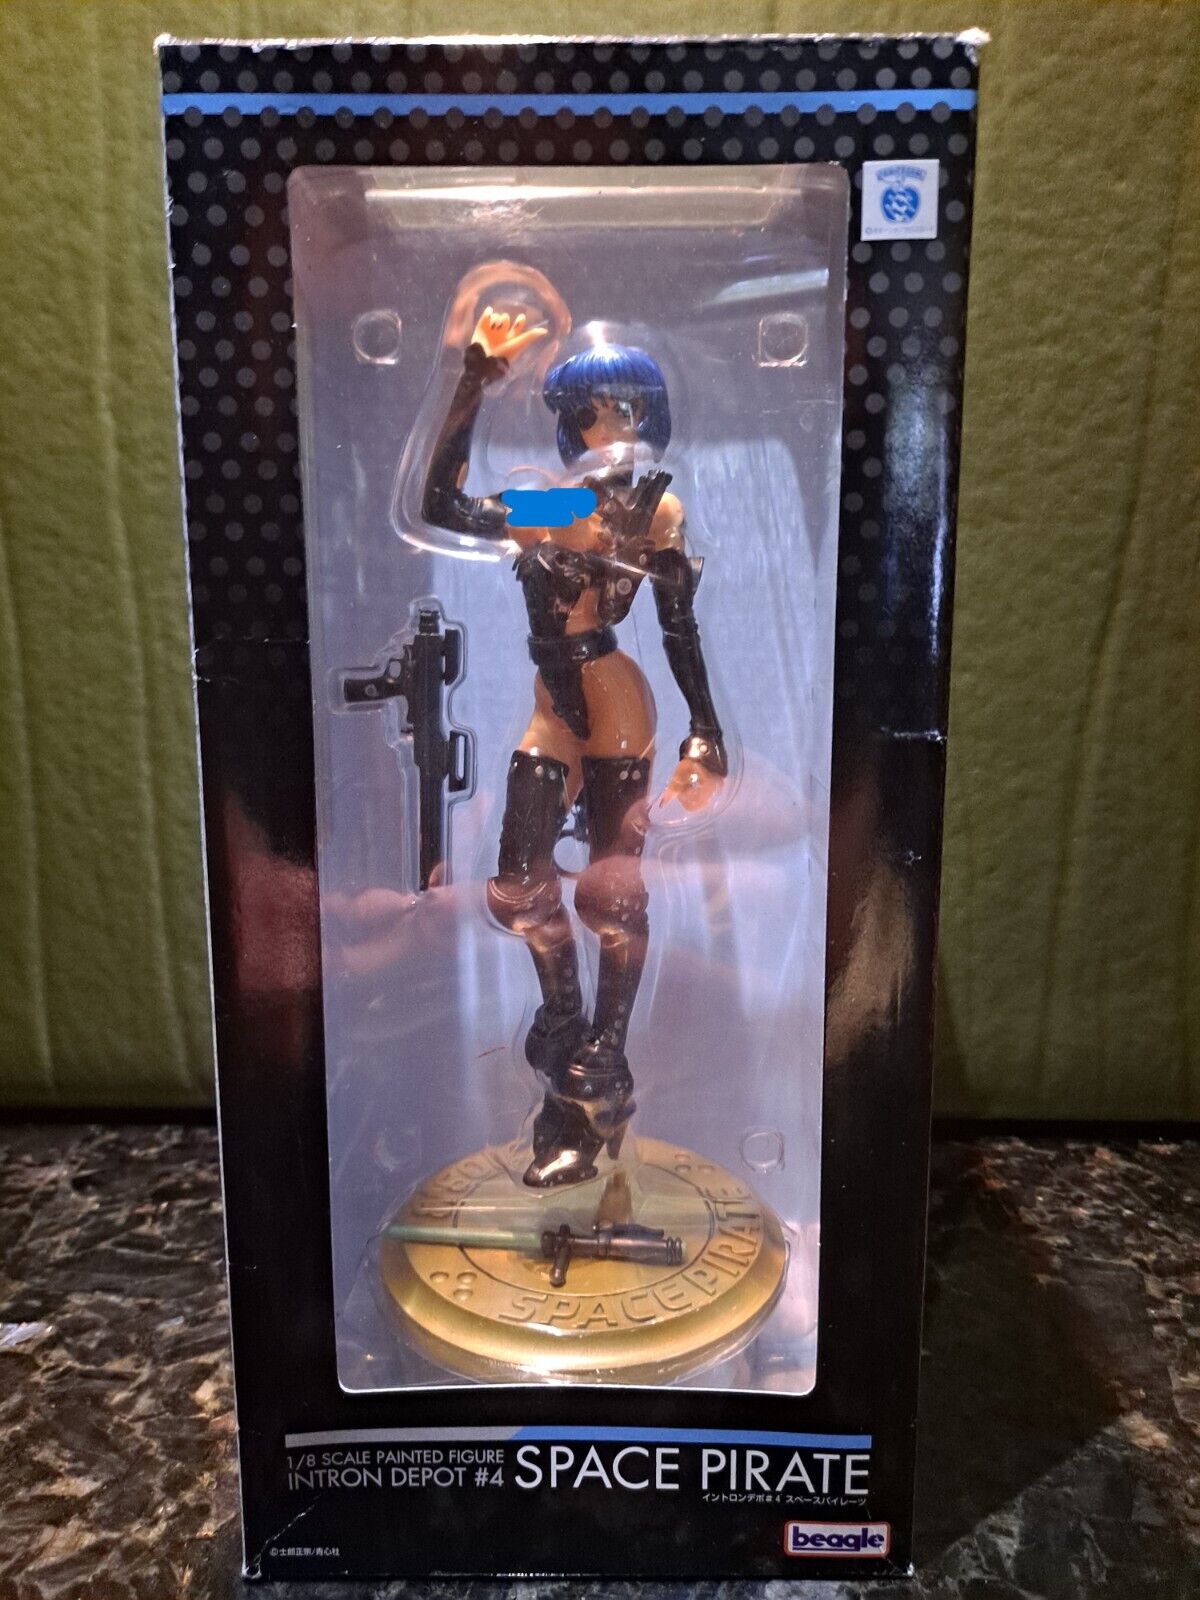 Shirow Masamune Intron Depot #4 Space Pirate Normal Ver Figure